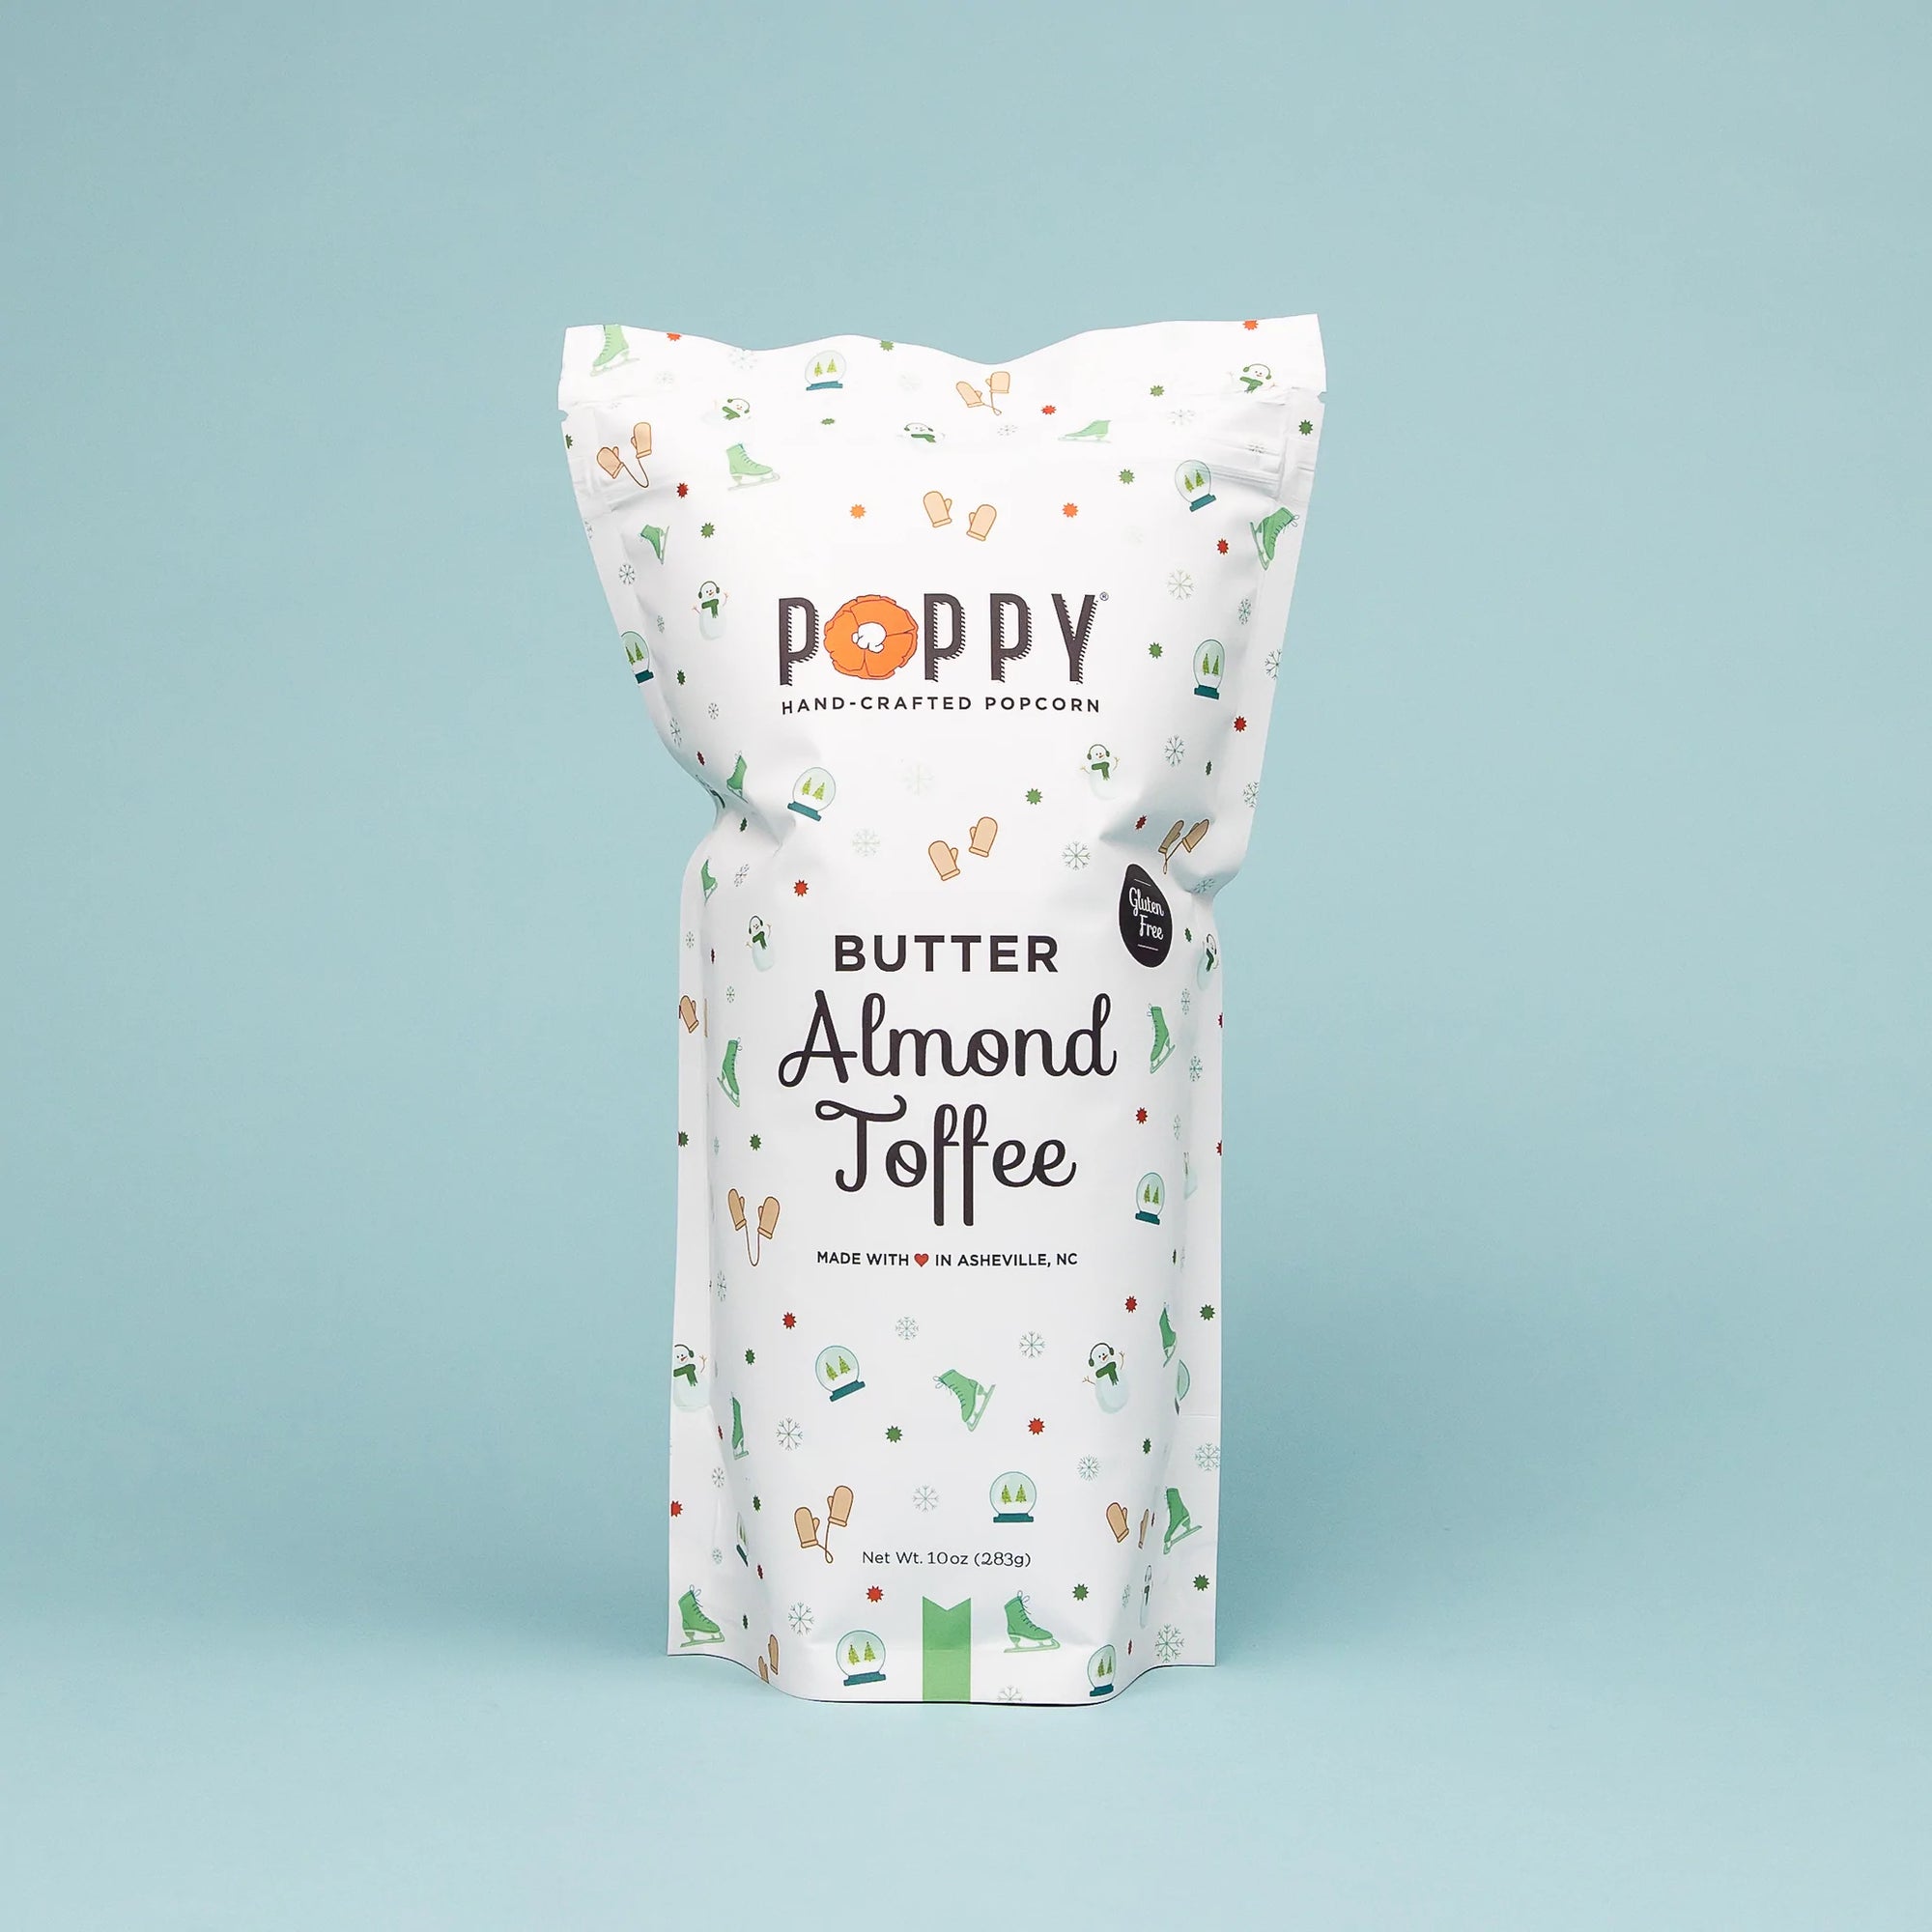 Poppy Handcrafted Popcorn- Butter Almond Toffee Holiday Market Bag